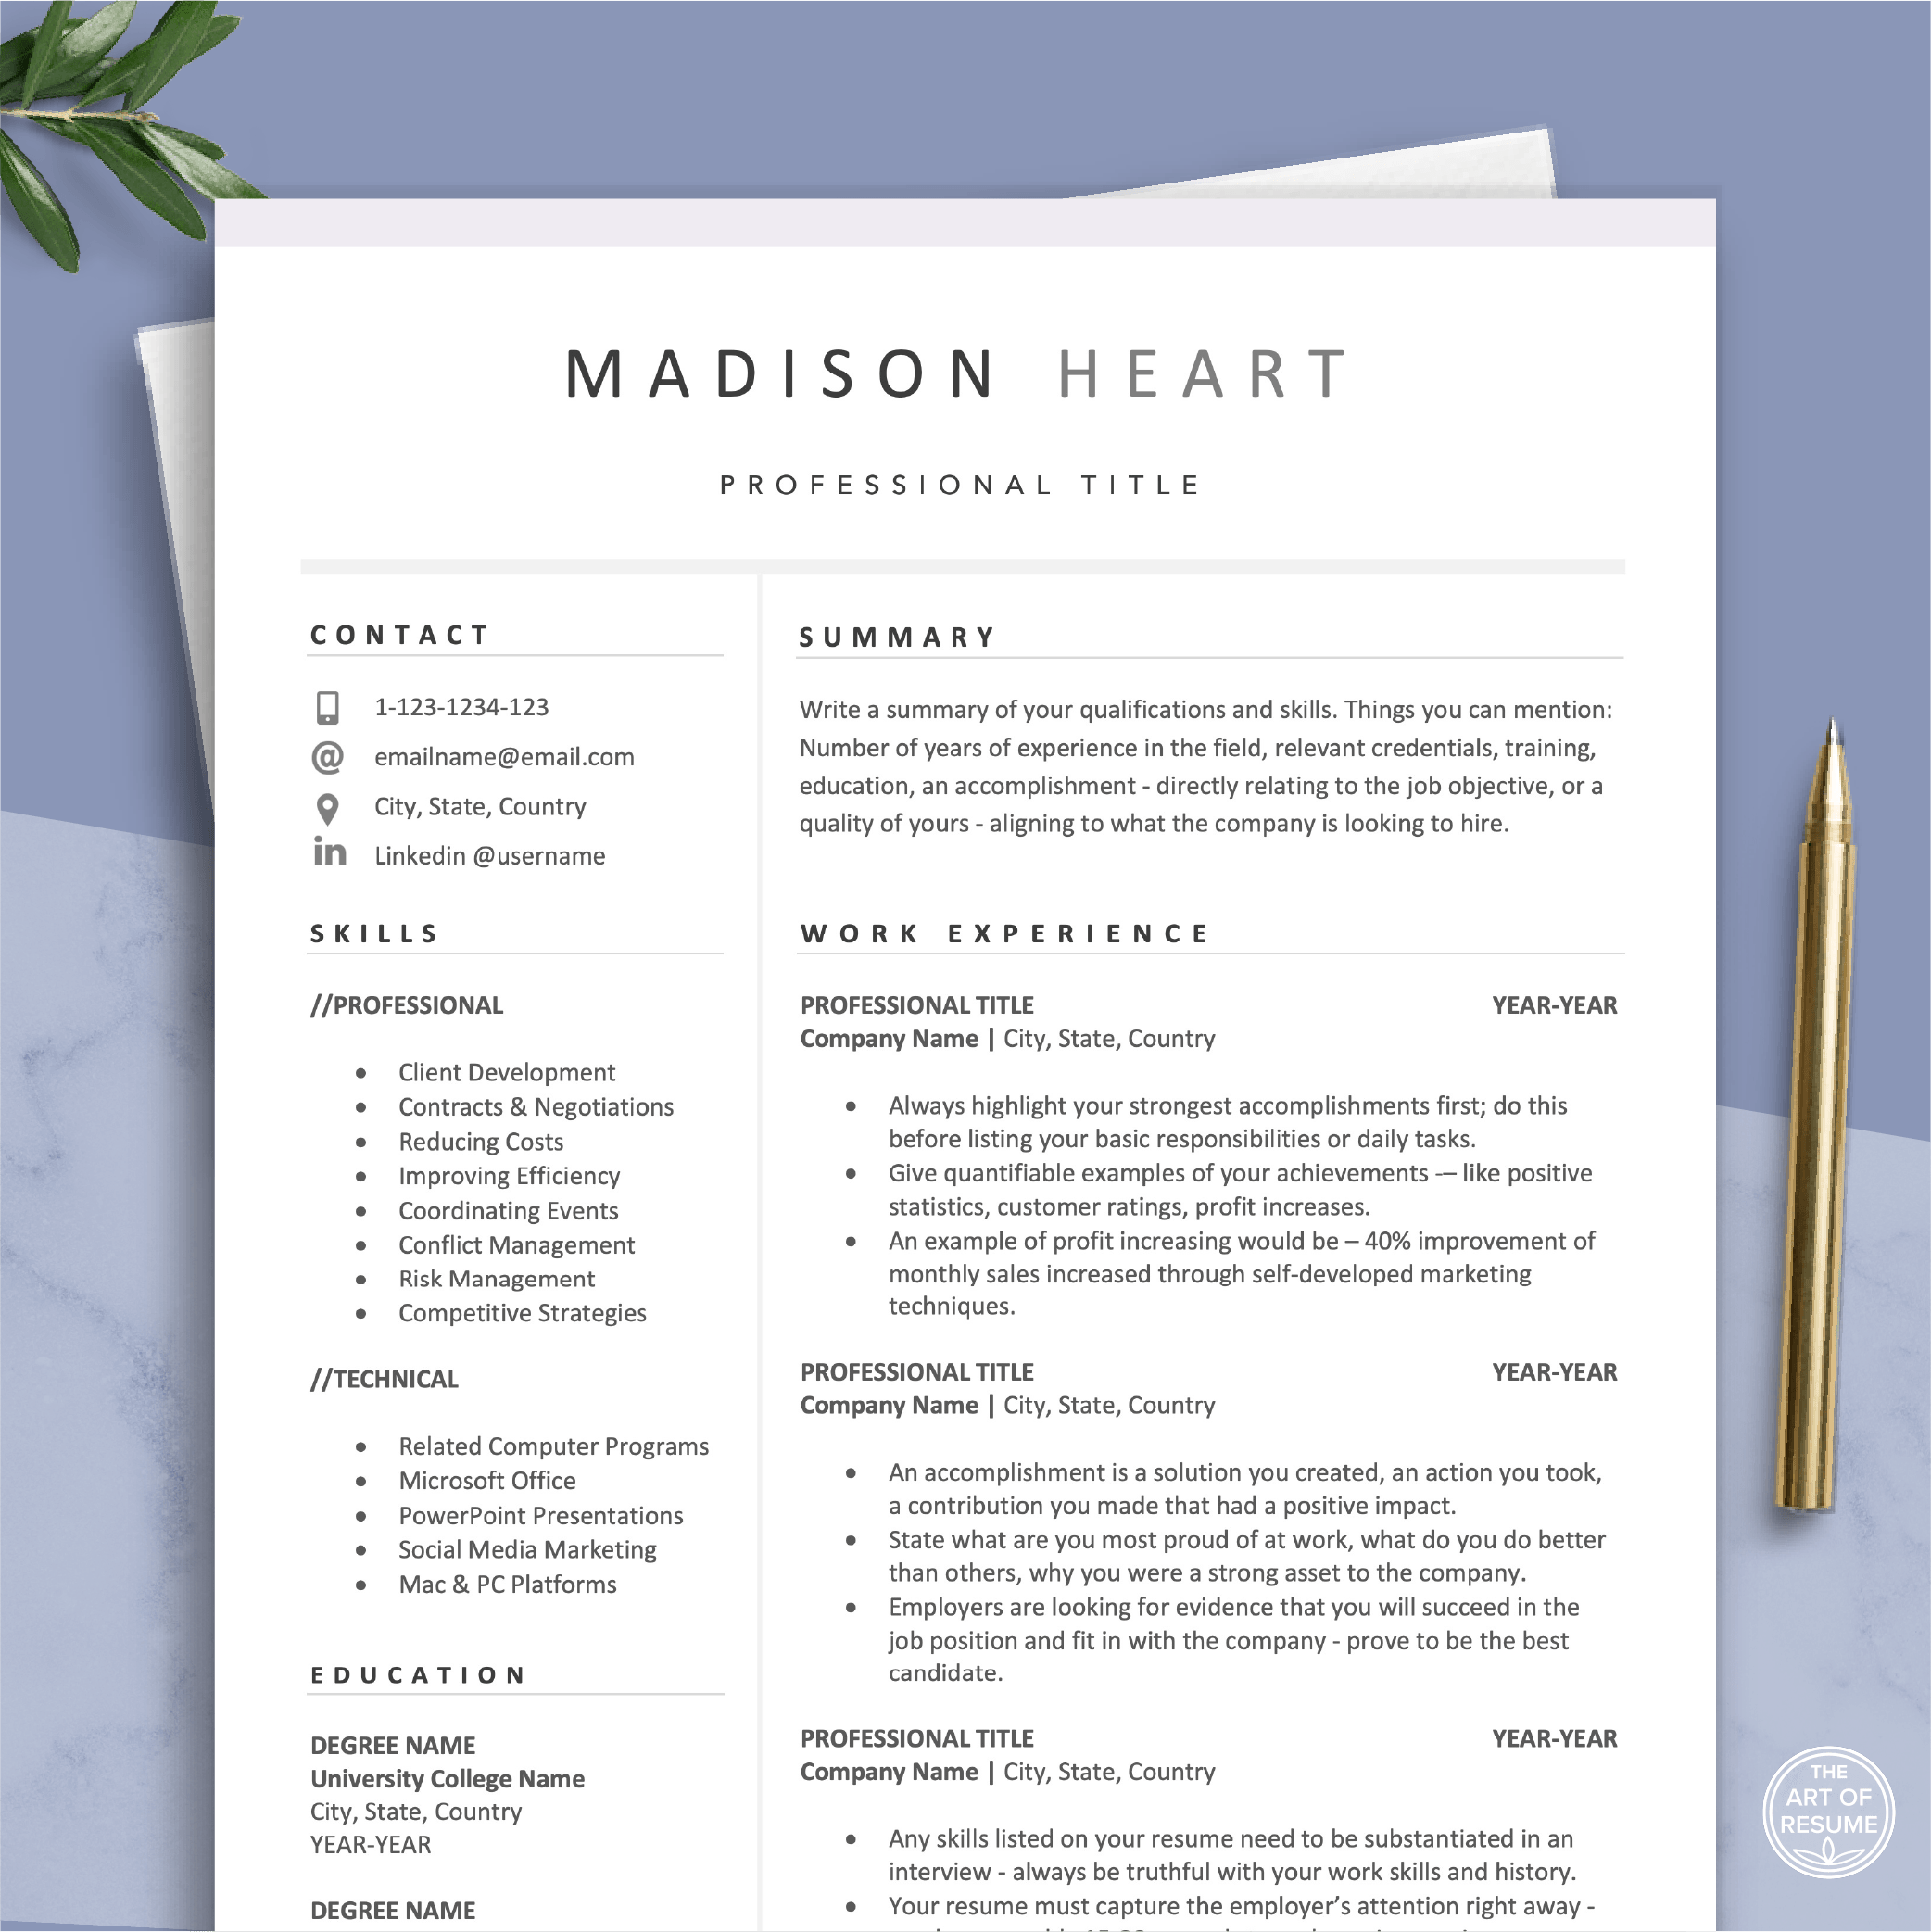 Instantly download your free resume template design bundle